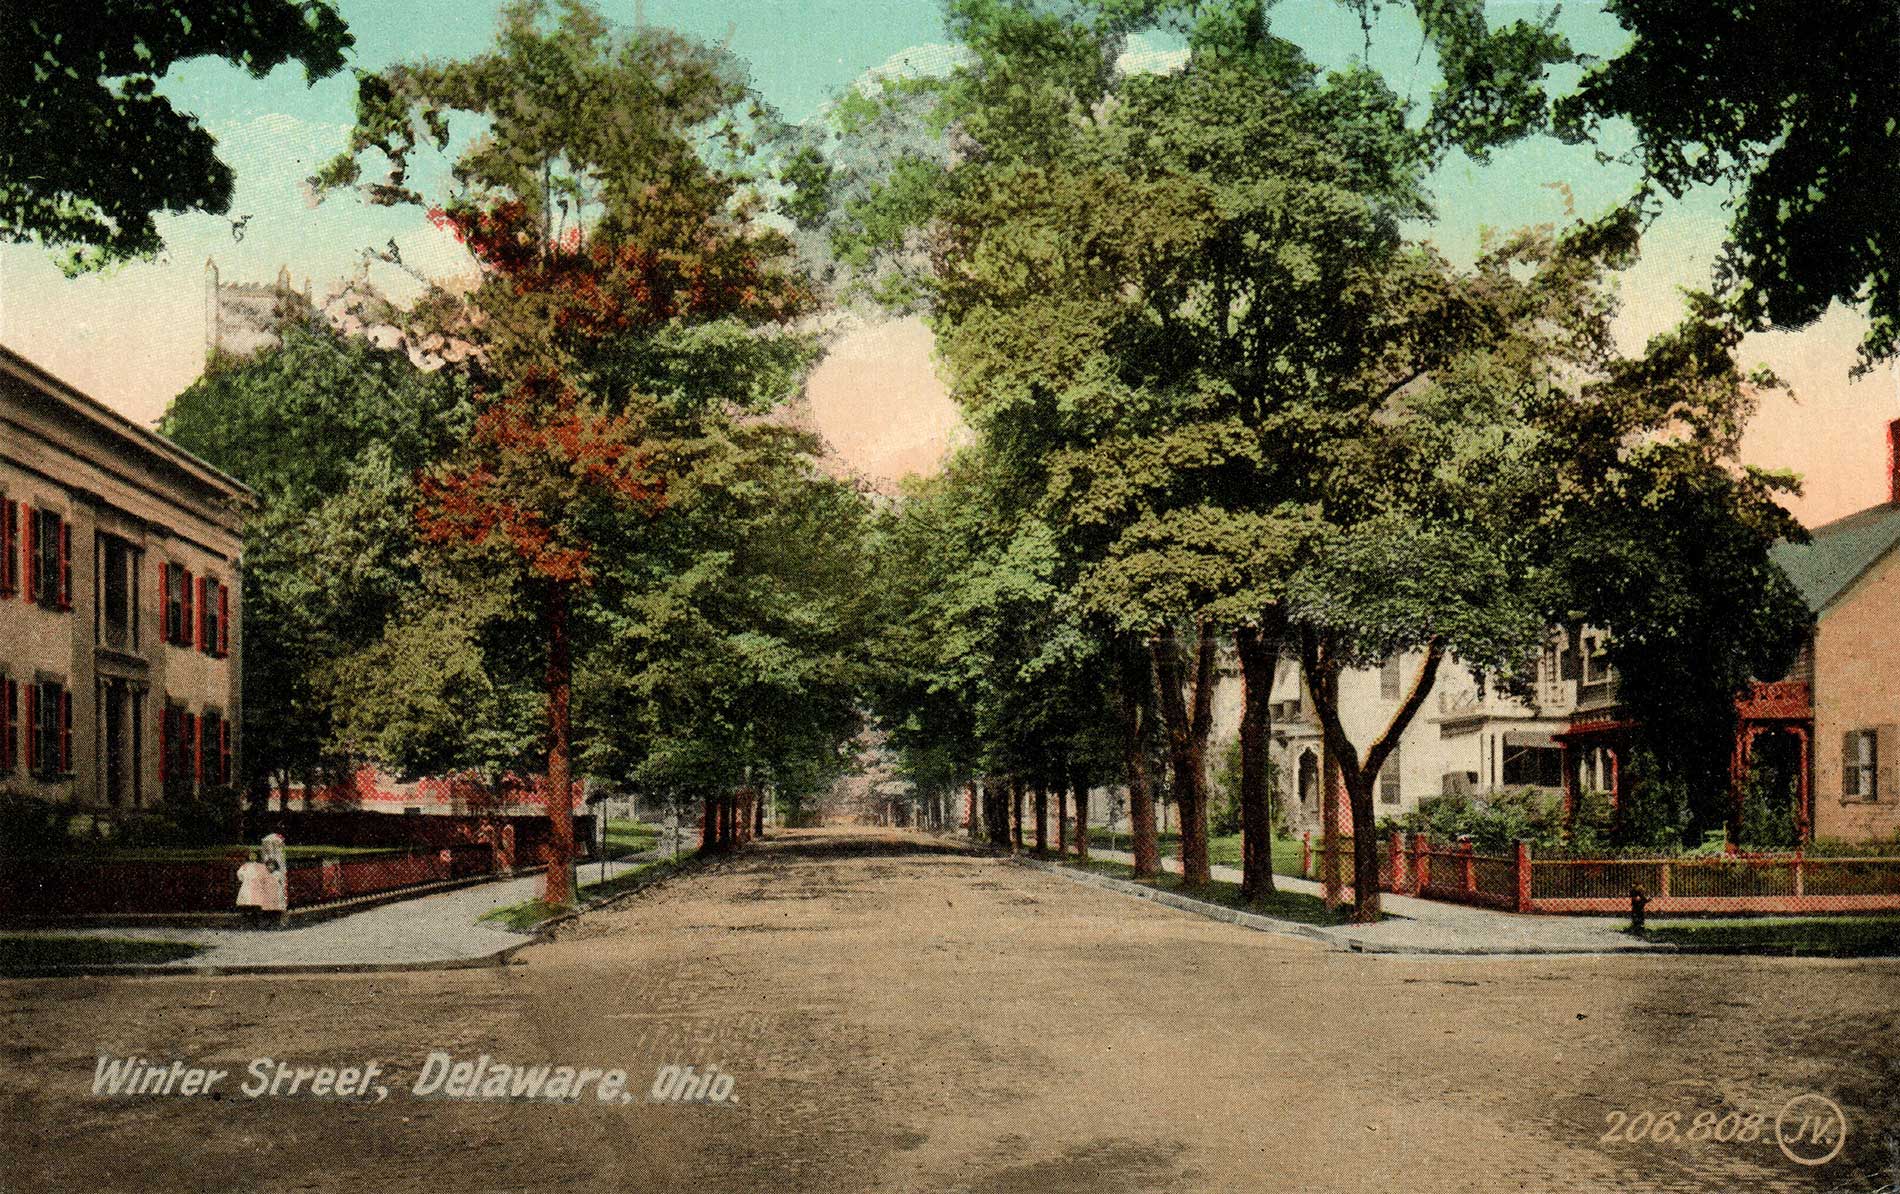 fig. 3 _ Winter Street in Delaware appears today much as it did in this early 20th c. view